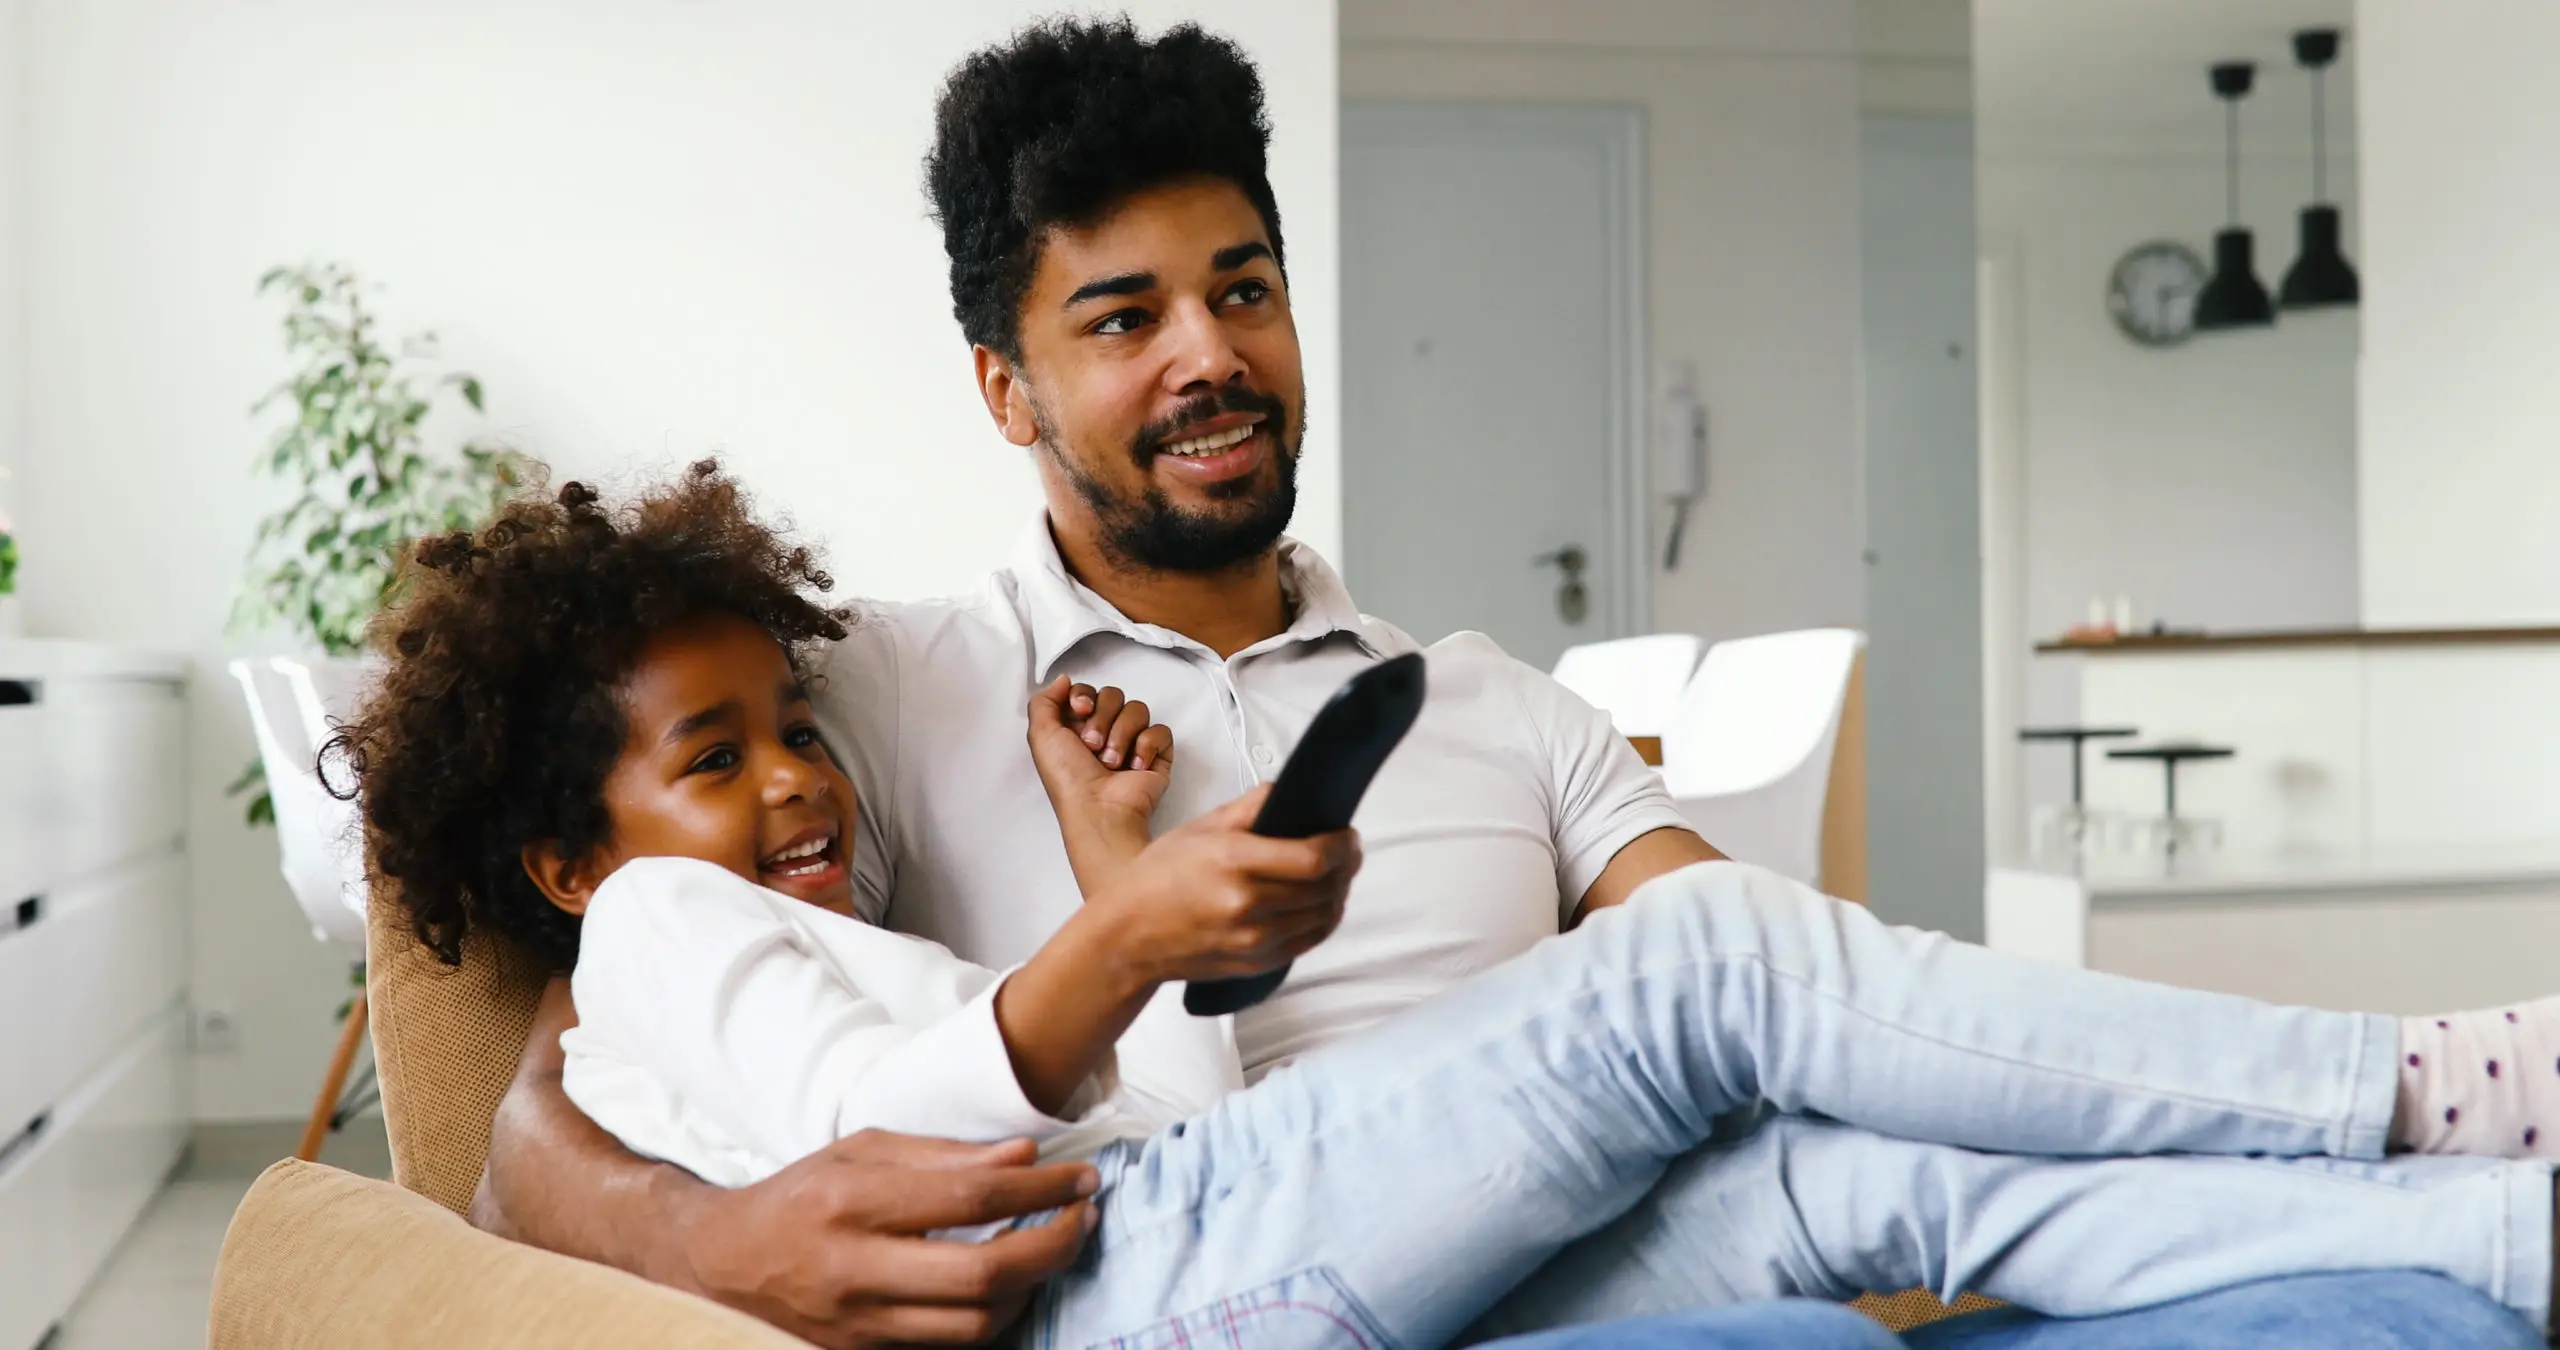 https://elements.envato.com/father-and-daughter-watching-television-65HP7G9